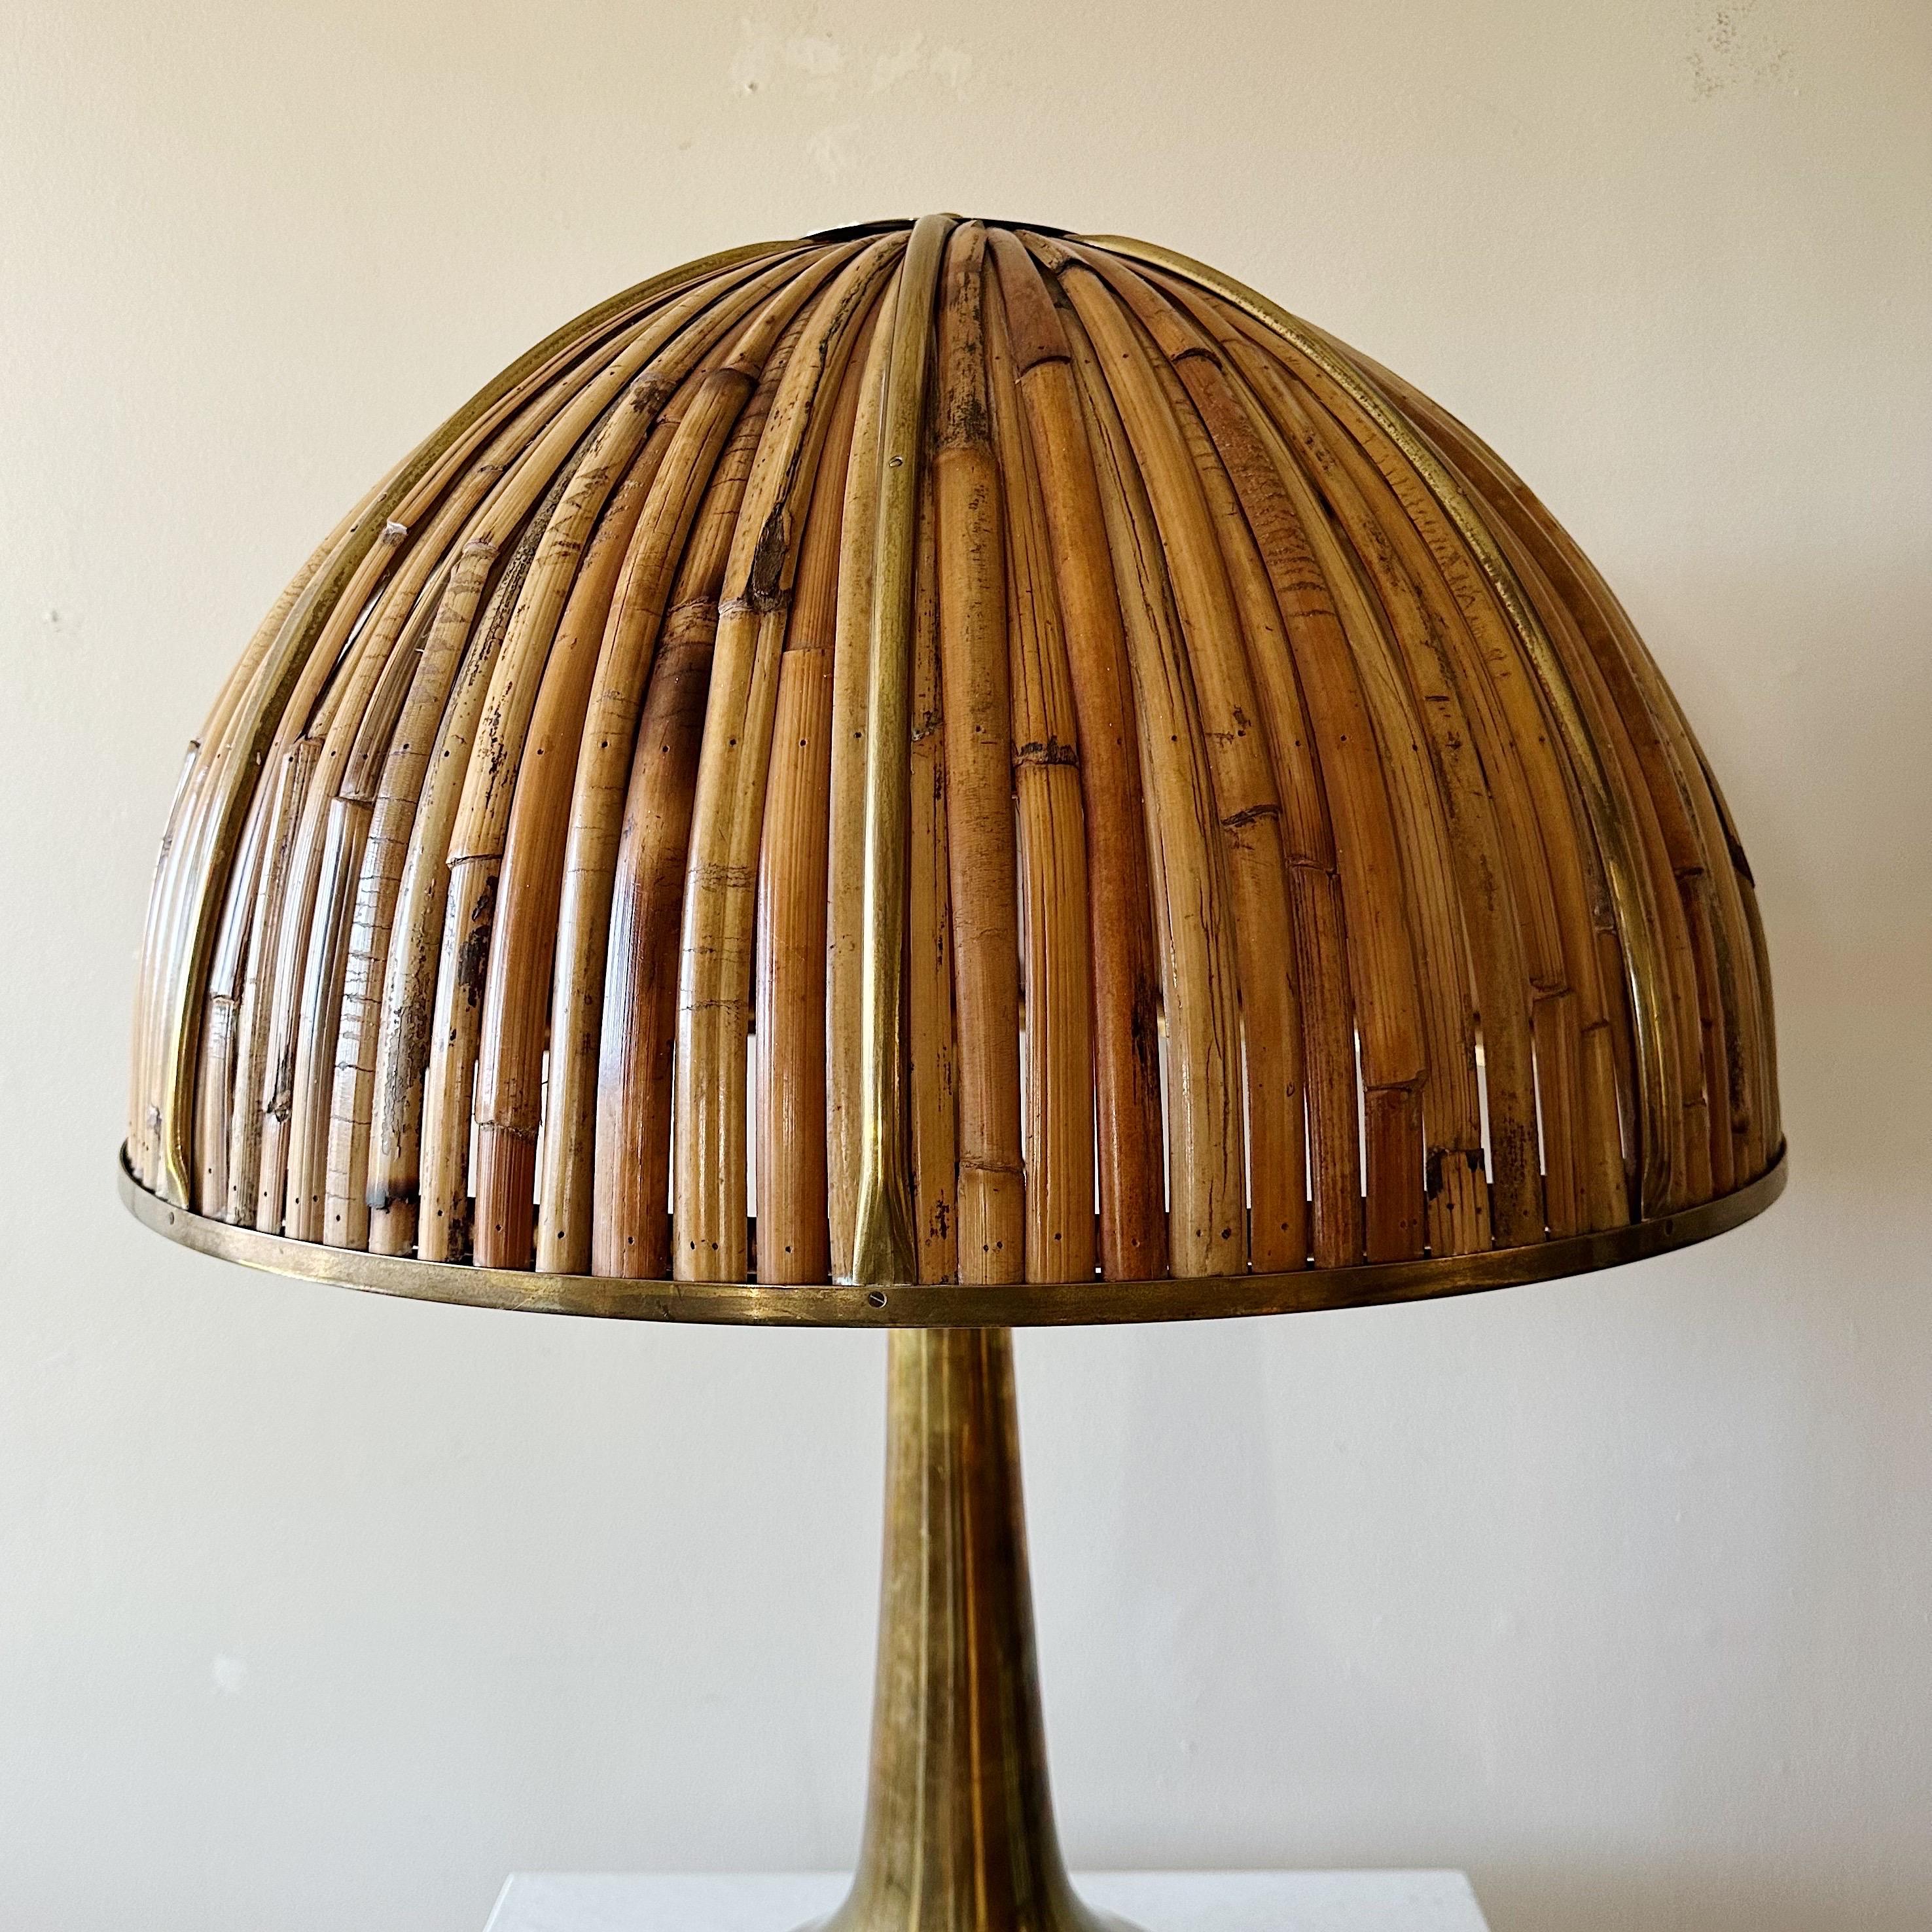 Gabriella Crespi Large Fungo Table Lamp, Rising Sun Series, 1973, Italy For Sale 2